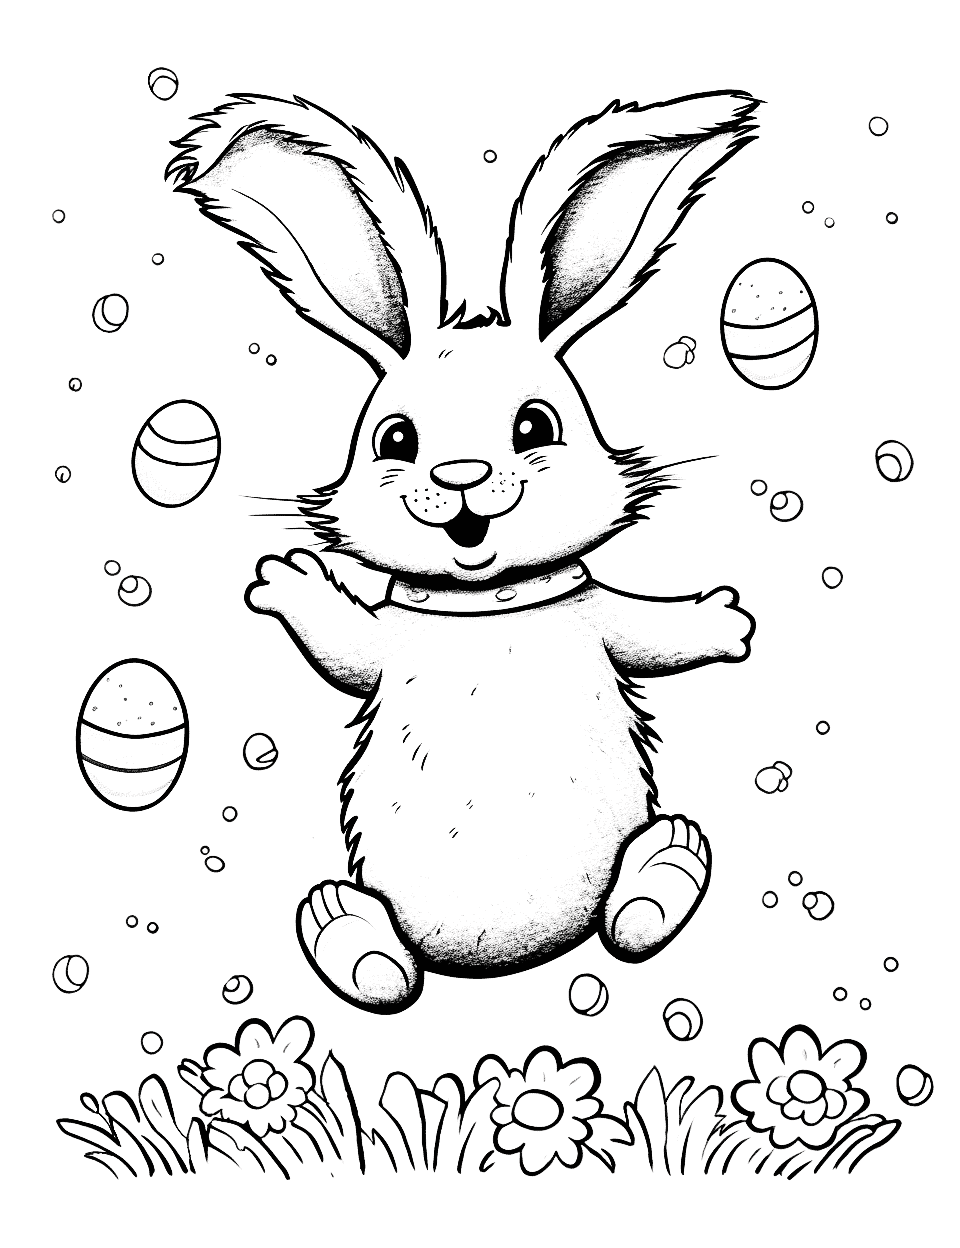 Joyful Easter Bunny Coloring Page - A jumping bunny, spreading joy and happiness, with a trail of colorful Easter eggs behind it.